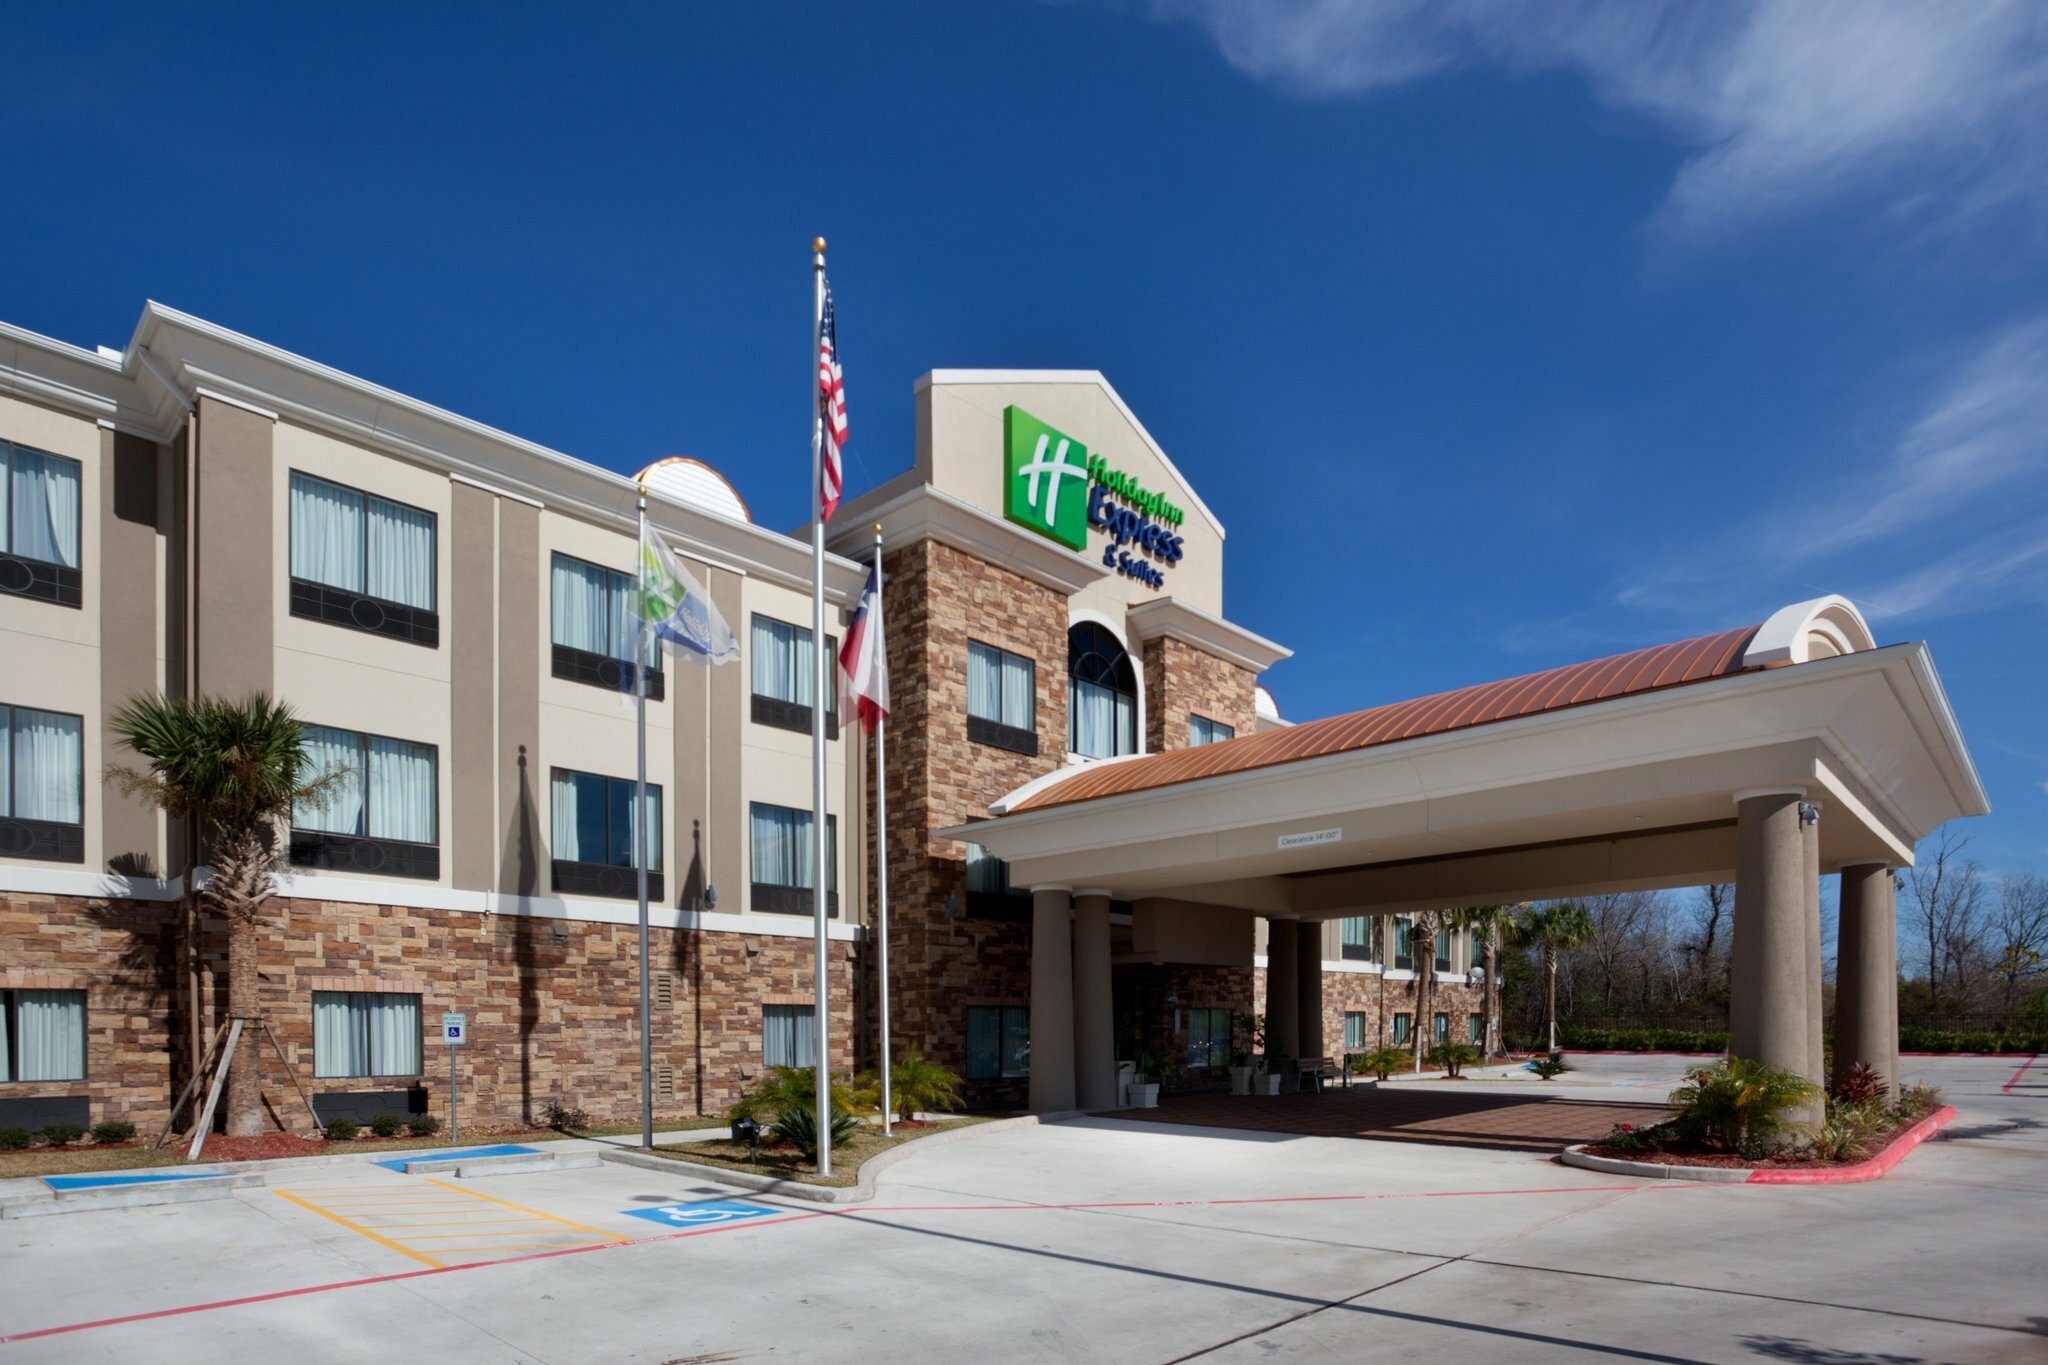 Photo of Holiday Inn Express Houston NW Beltway 8-West Road, Houston, TX